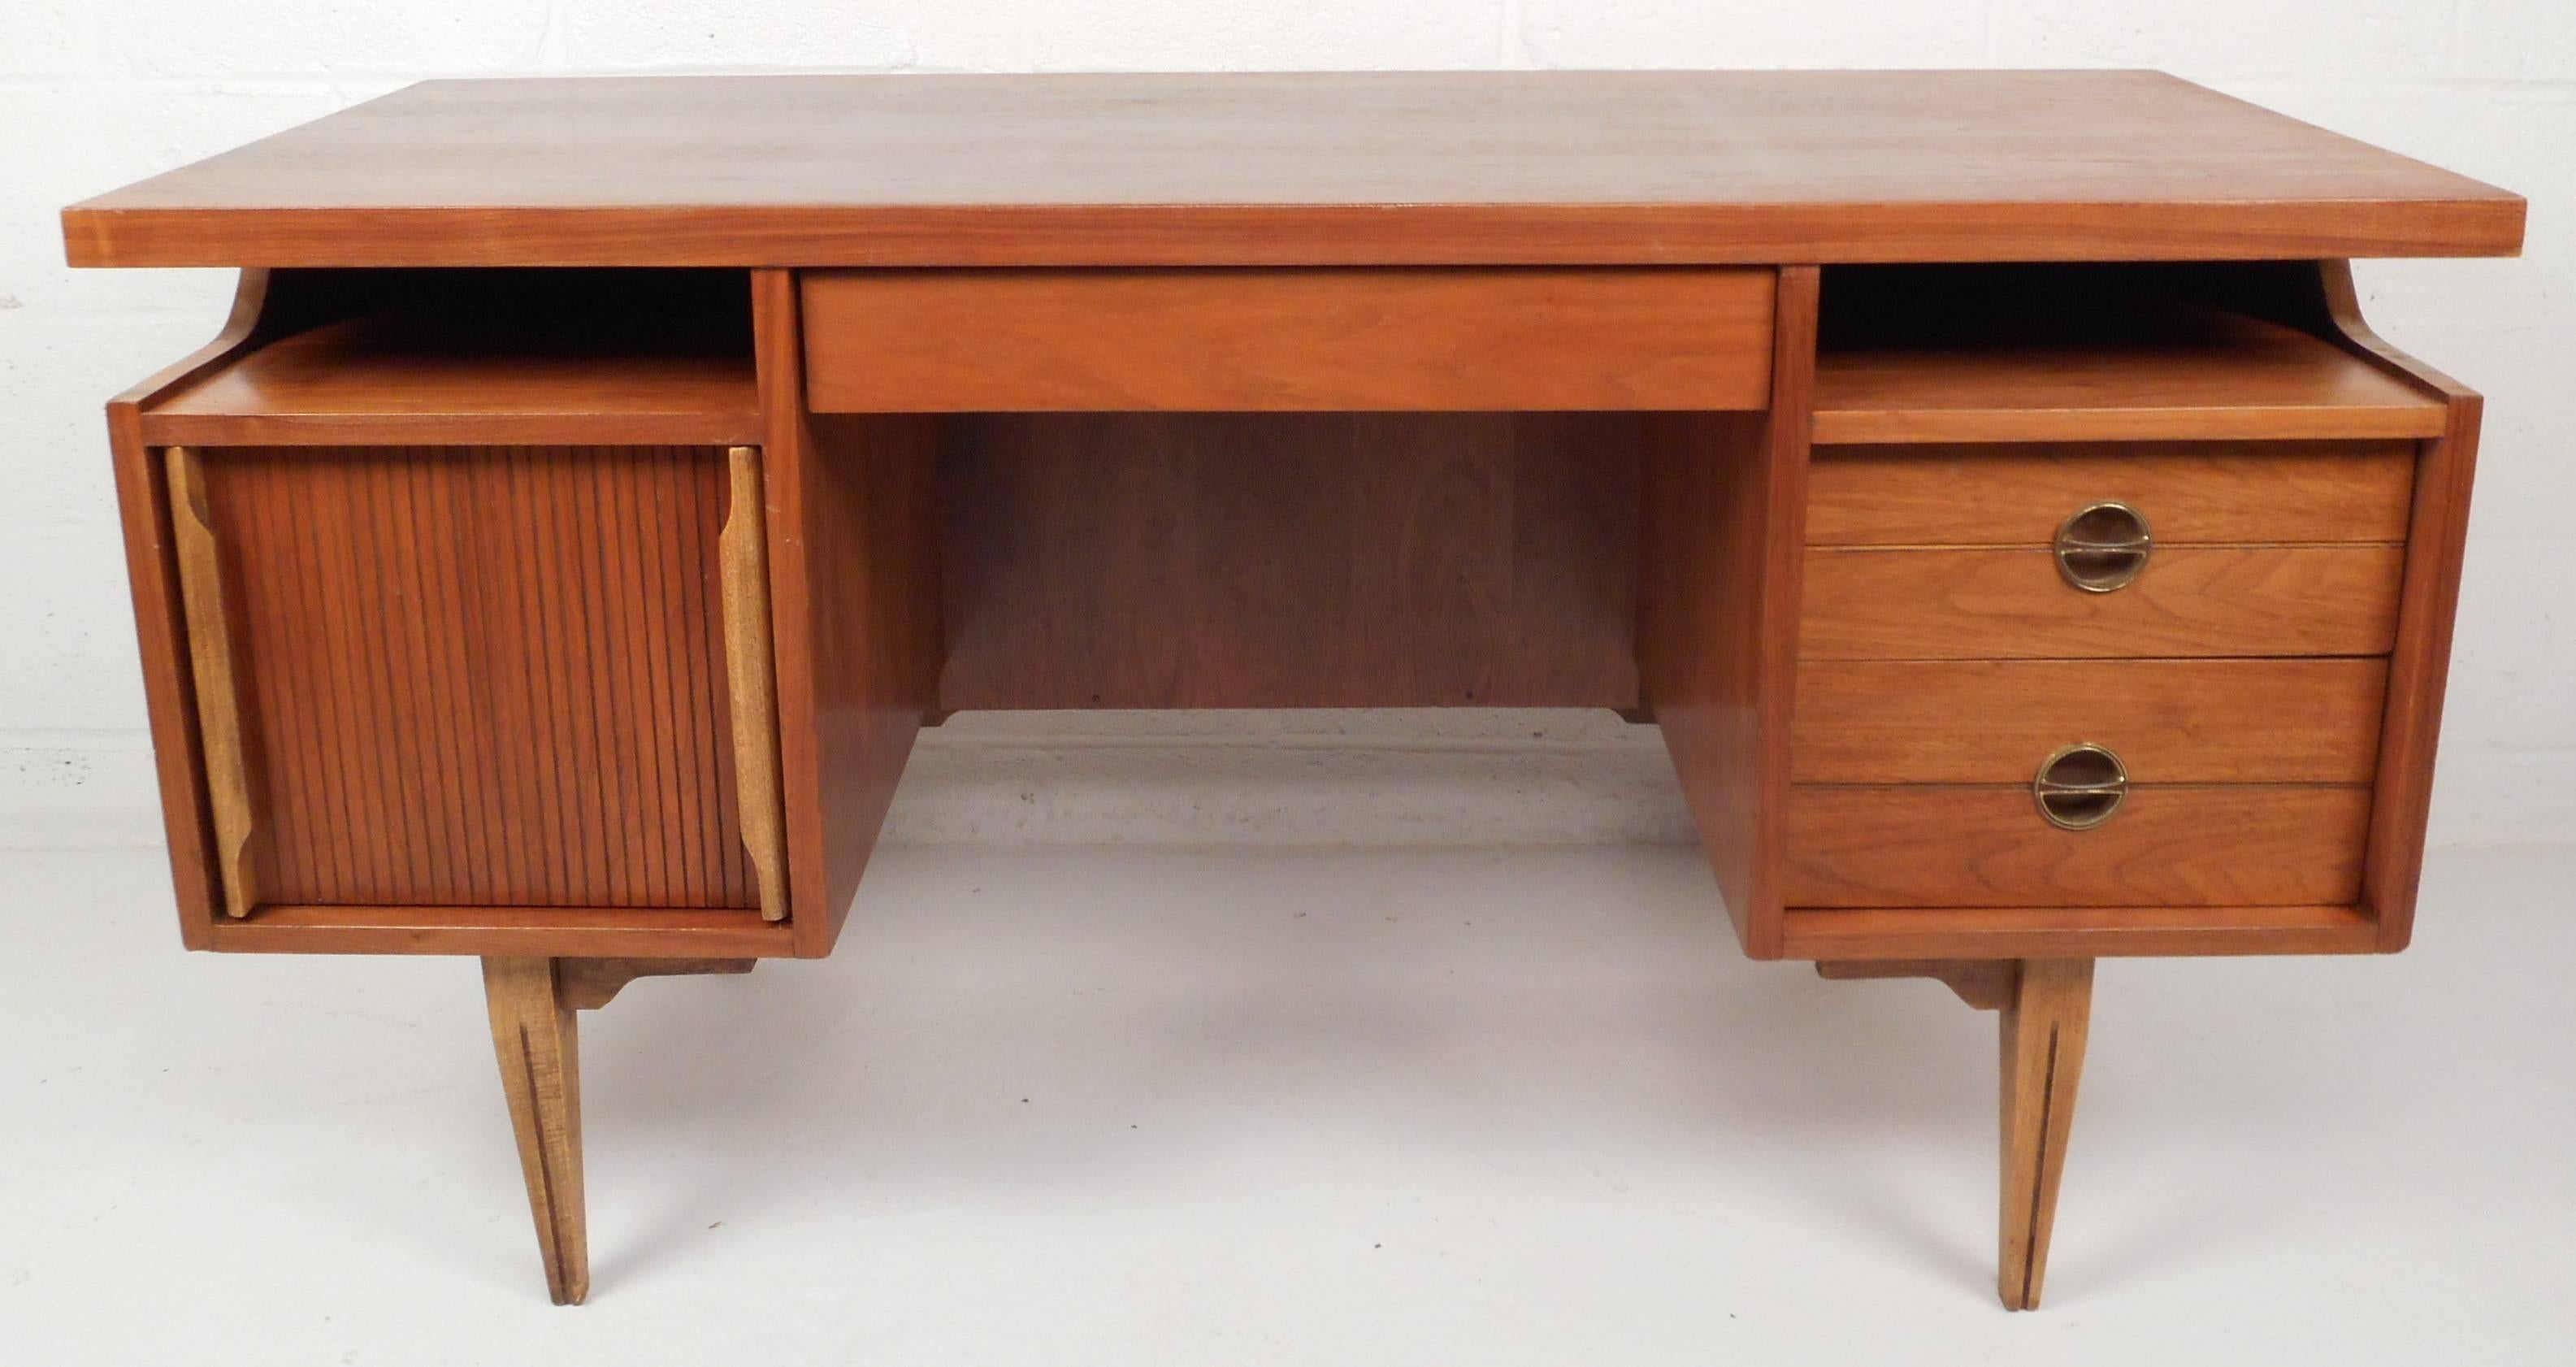 Stunning vintage modern walnut desk features the iconic floating top that Hooker Furniture is known for. Unique design offers plenty of room for storage with three dovetail drawers and one large file drawer. Beautiful sculpted brass pulls and